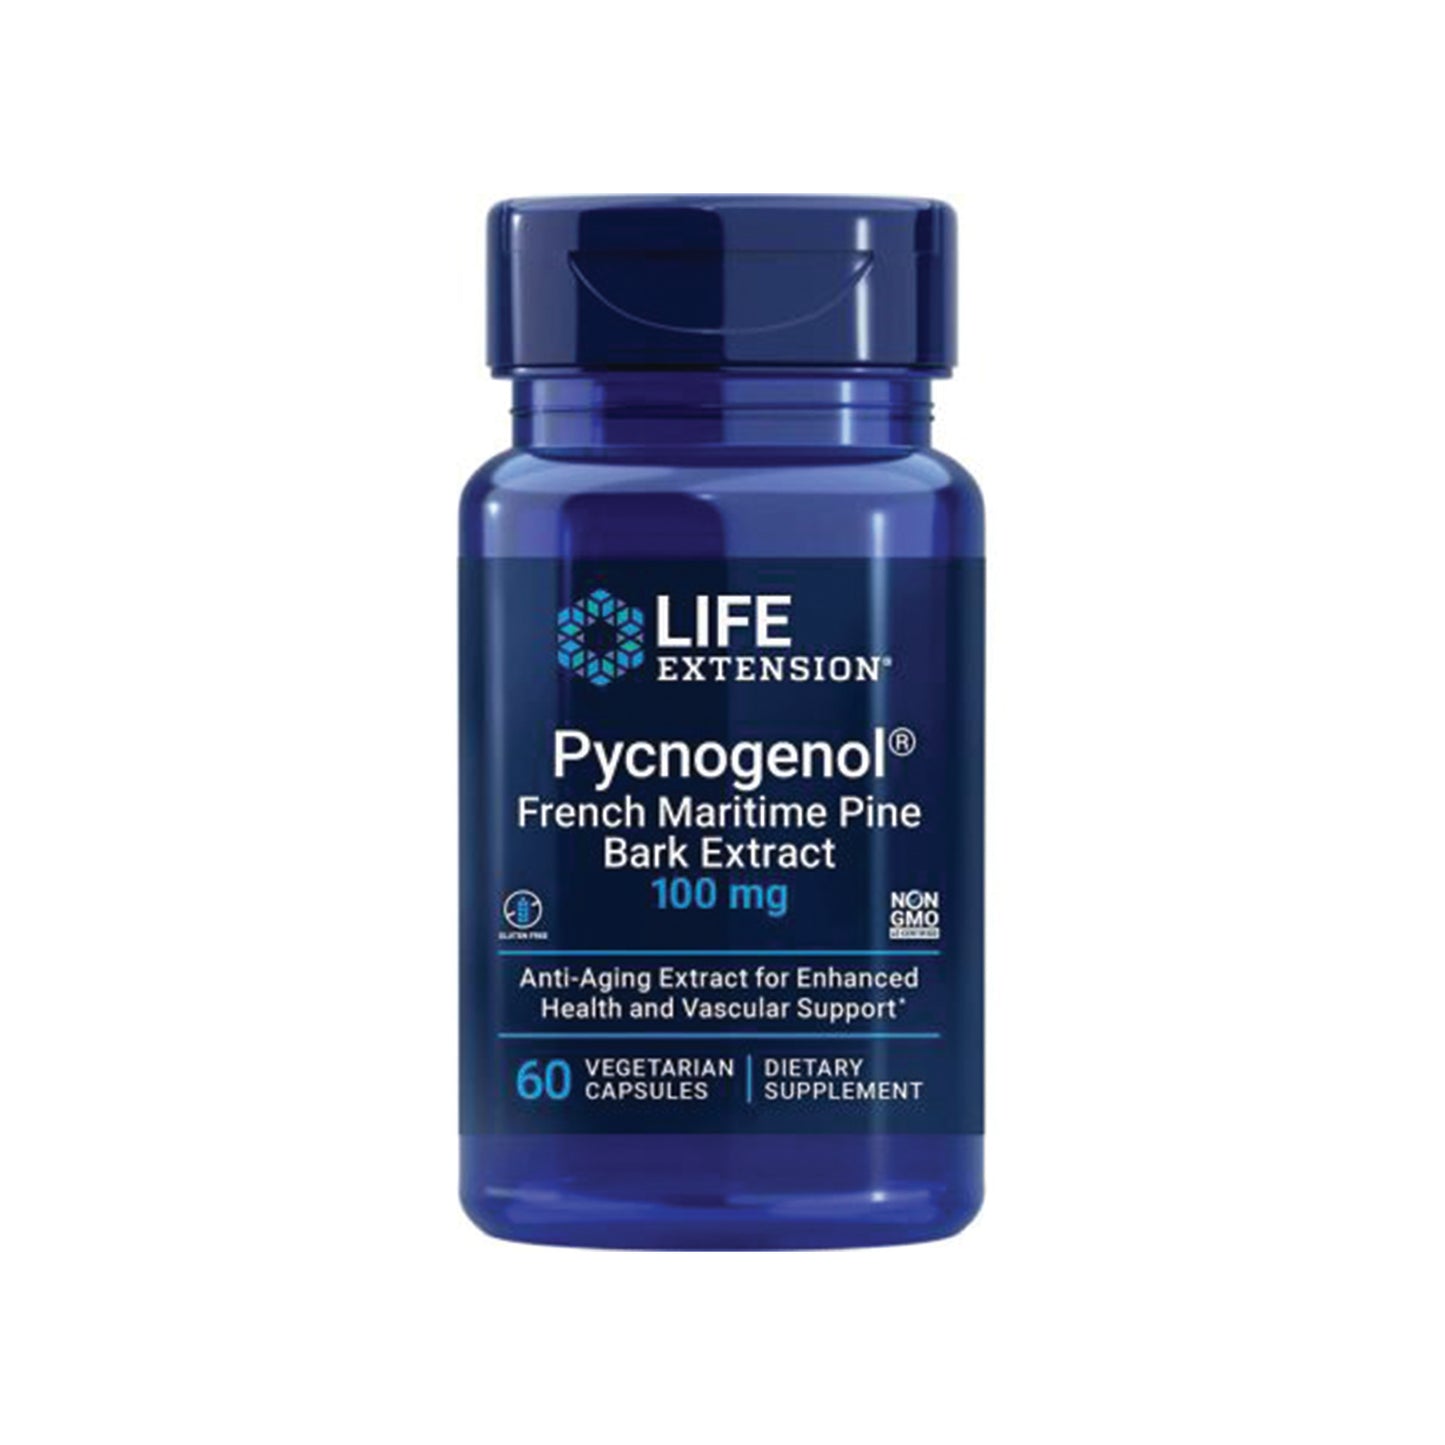 Life Extension, Pycnogenol French Maritime Pine Bark Extract, 100 mg - 60 Veggie Caps